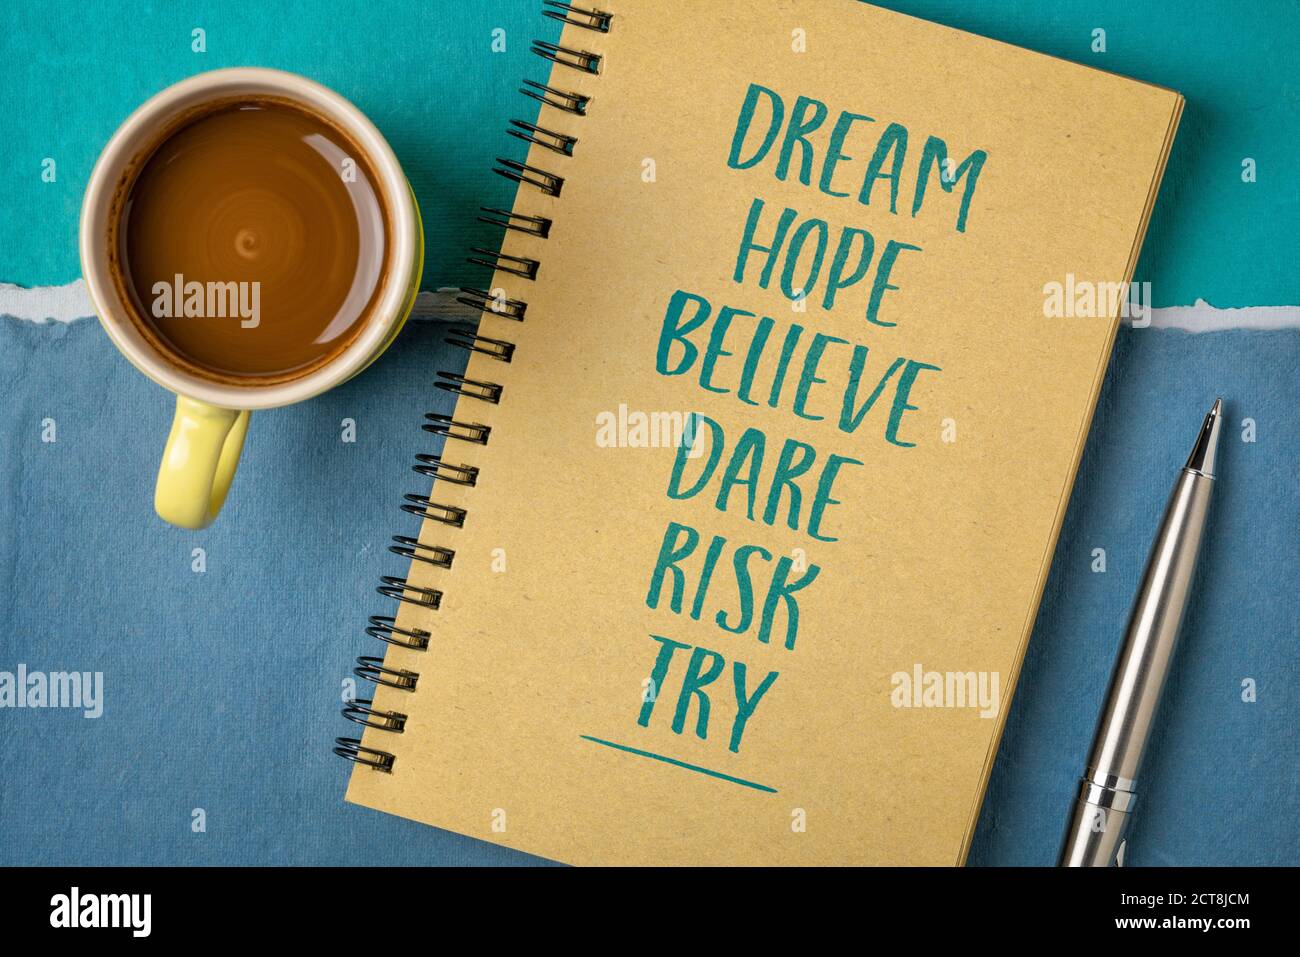 dream, hope, believe, dare, risk, try - creativity, inspirational and motivational concept, personal development,  handwriting in a spiral sketchbook Stock Photo